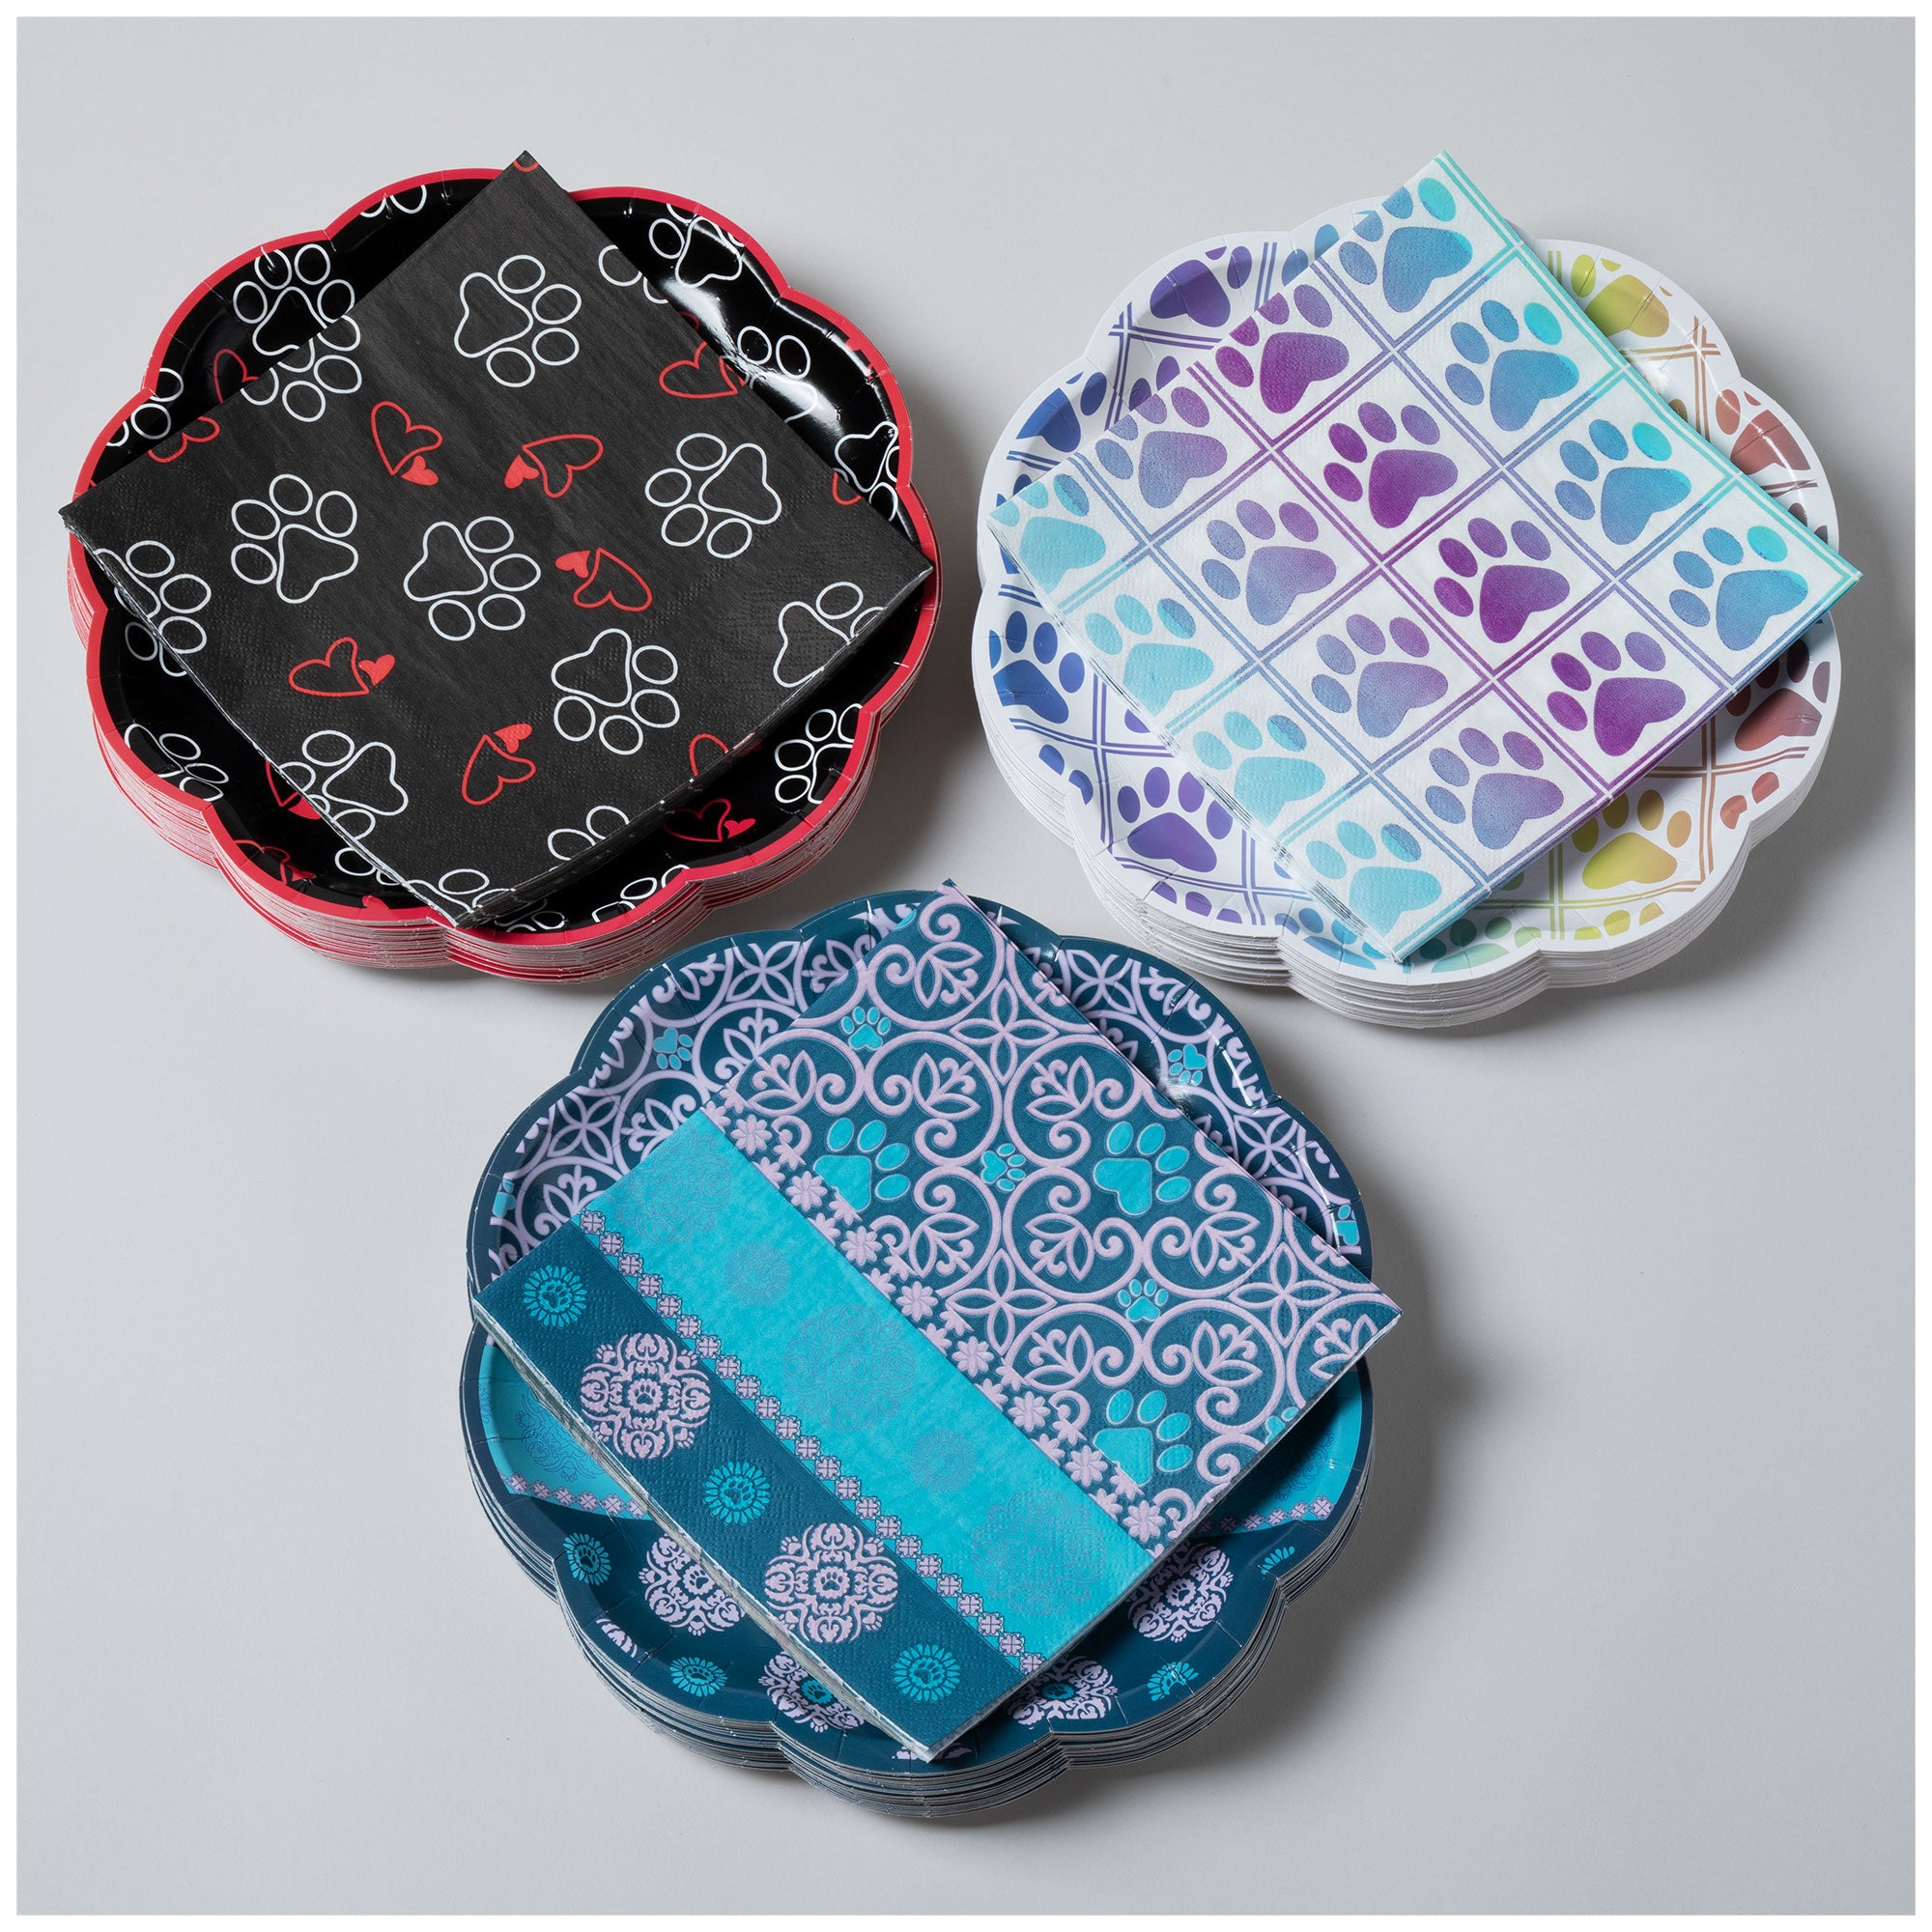 Pawfect Occasion Paper Plates & Napkins - Perfectly Patterned Paws - Plates Only